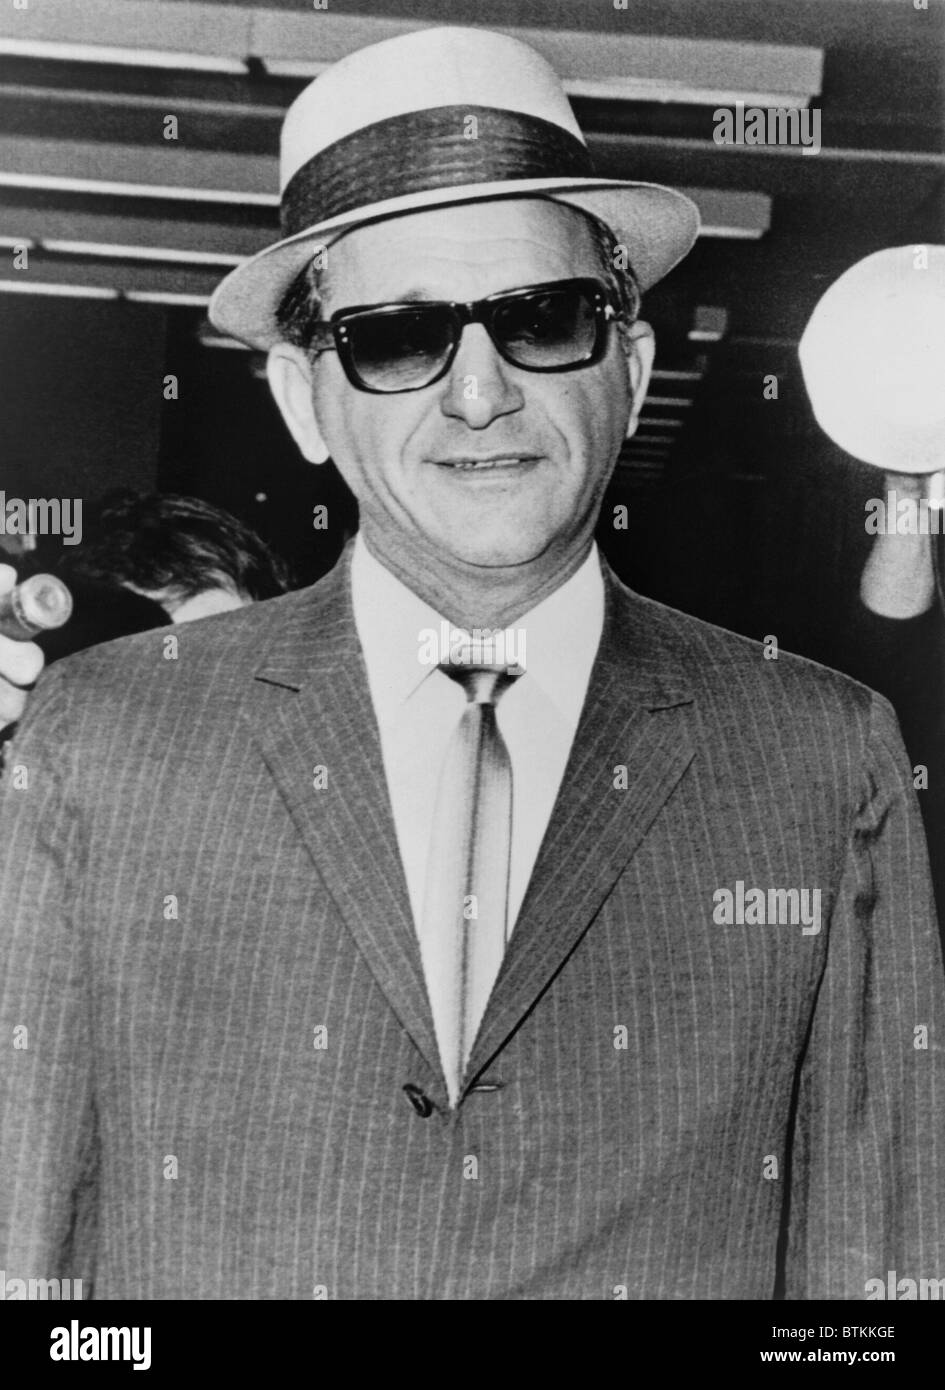 Sammy Giancana (1908-1975), American mobster and boss of the 'Chicago Outfit', arriving at the U.S. District Court in Chicago. He was jailed for a year after refusing to cooperate with the grand jury investigation. June 1, 1965 Stock Photo